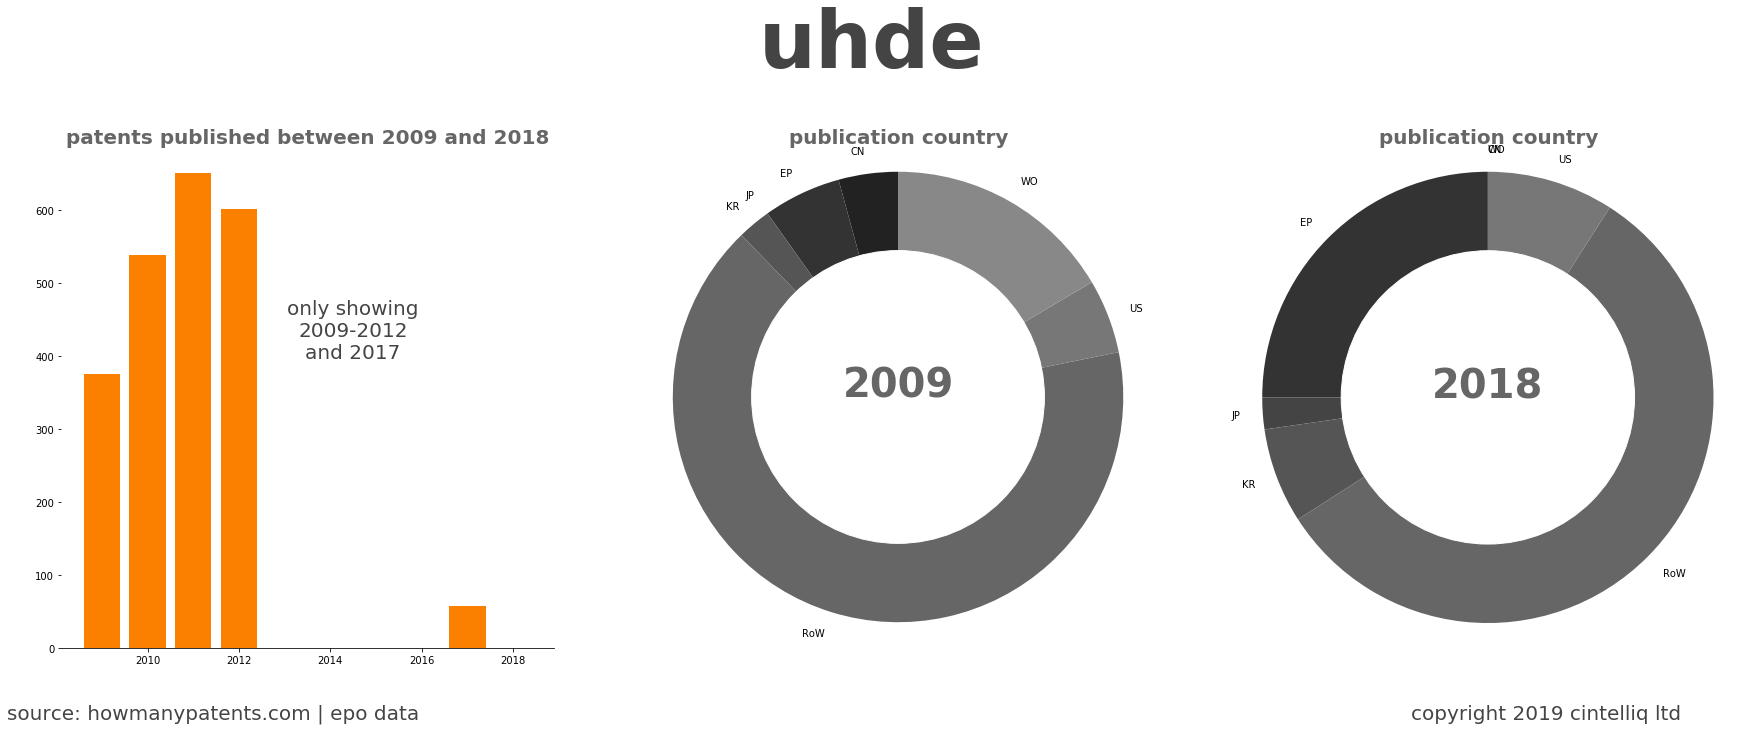 summary of patents for Uhde